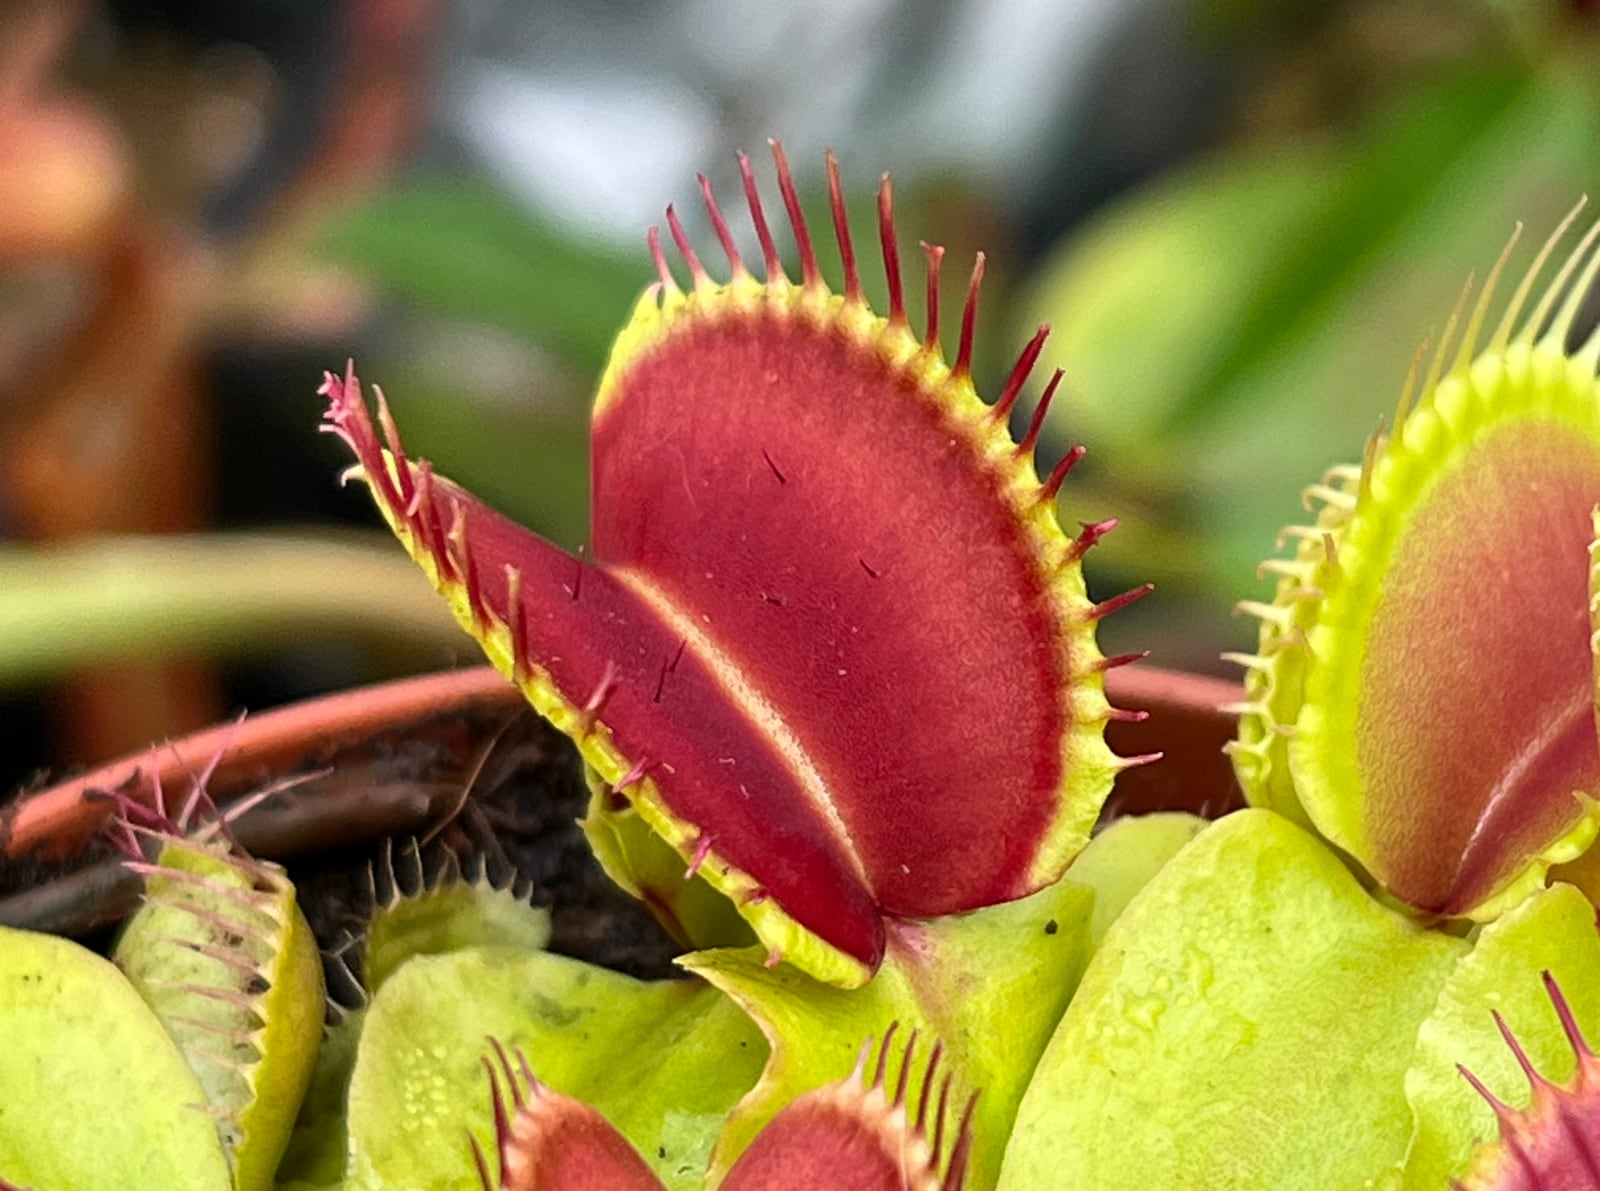 My healthy Venus flytrap (Dionaea muscipula) produces traps which turn nice and red in the sun.